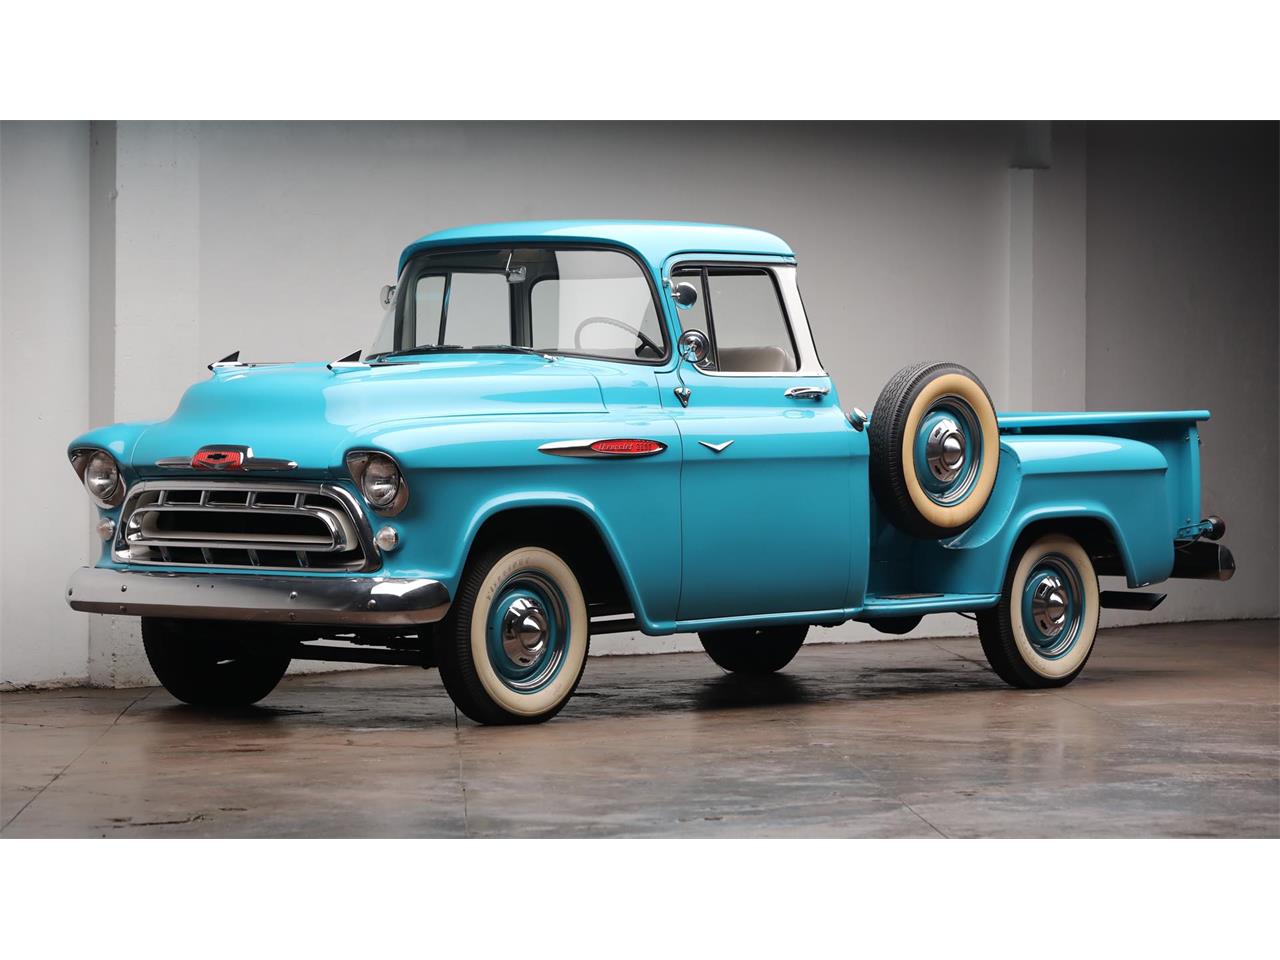 For Sale at Auction: 1957 Chevrolet 3200 for sale in Corpus Christi, TX